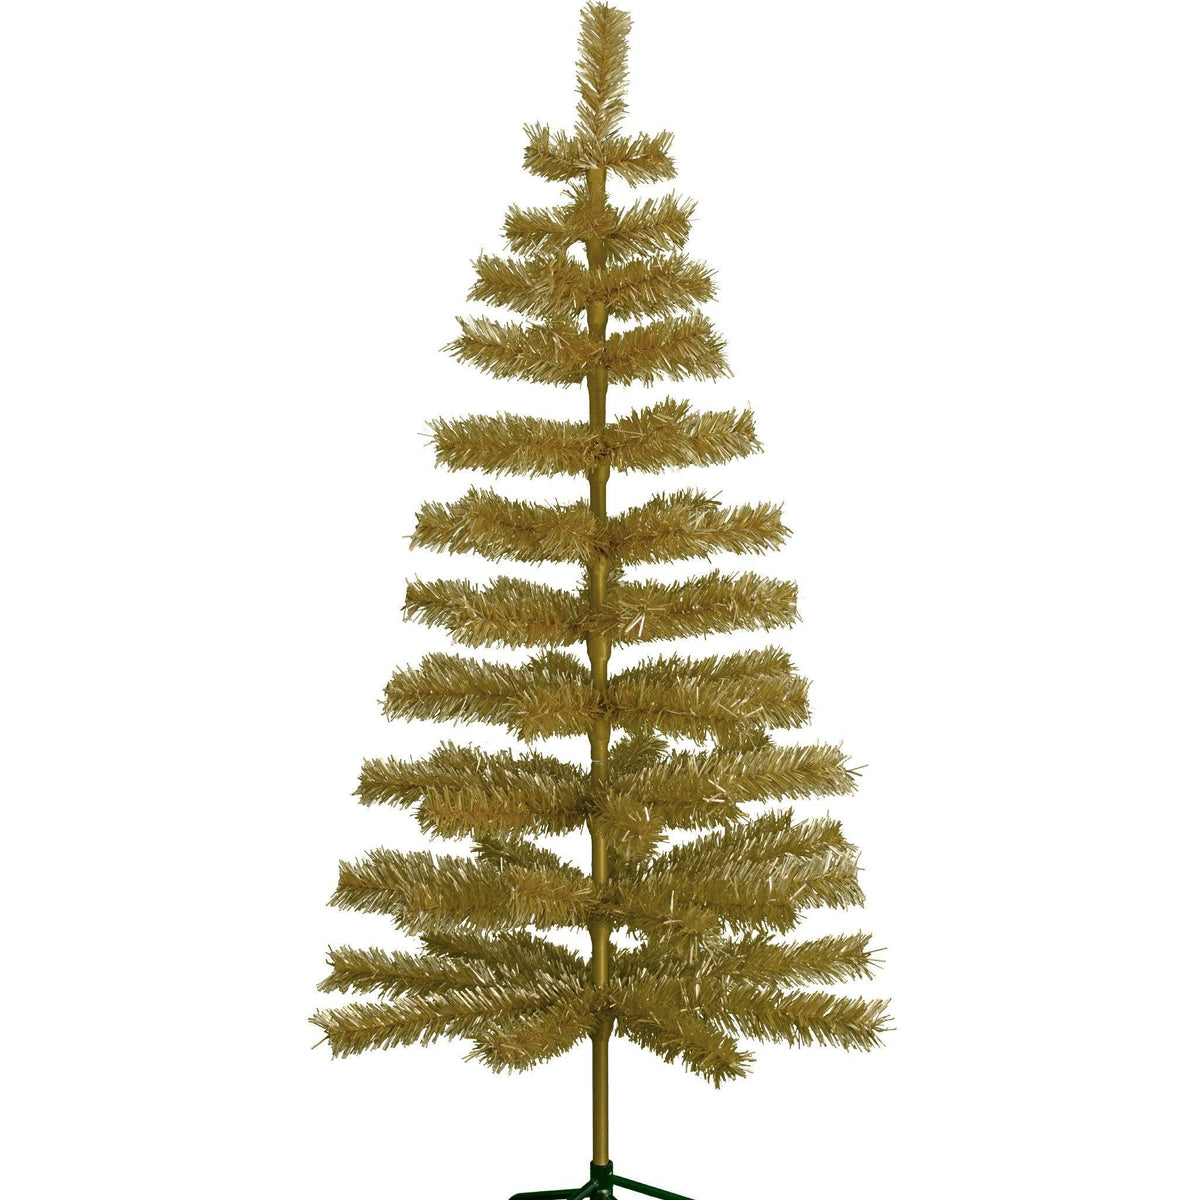 Our 60in Tall Antique Gold Christmas Tree.  Celebrate Lee Display's 120th Anniversary with our brand new Antique Gold colored tinsel Christmas Trees.  Shop for antique gold christmas trees at leedisplay.com